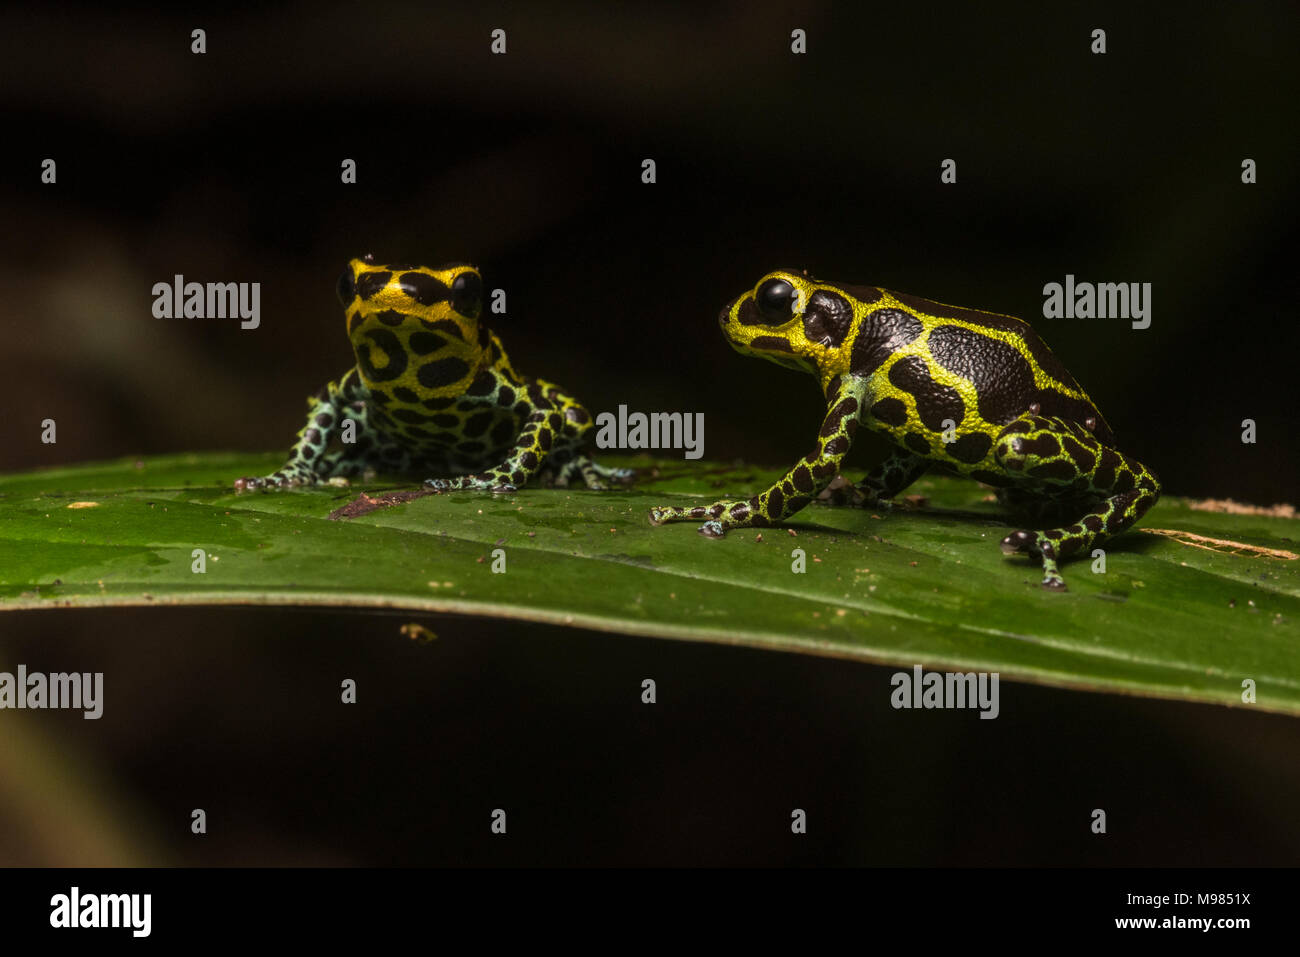 Ranitomeya imitator is the only frog known to be genetically monogamous. It is also a mullerian mimic of R. variabilis, a sympatric poison frog specie. Stock Photo